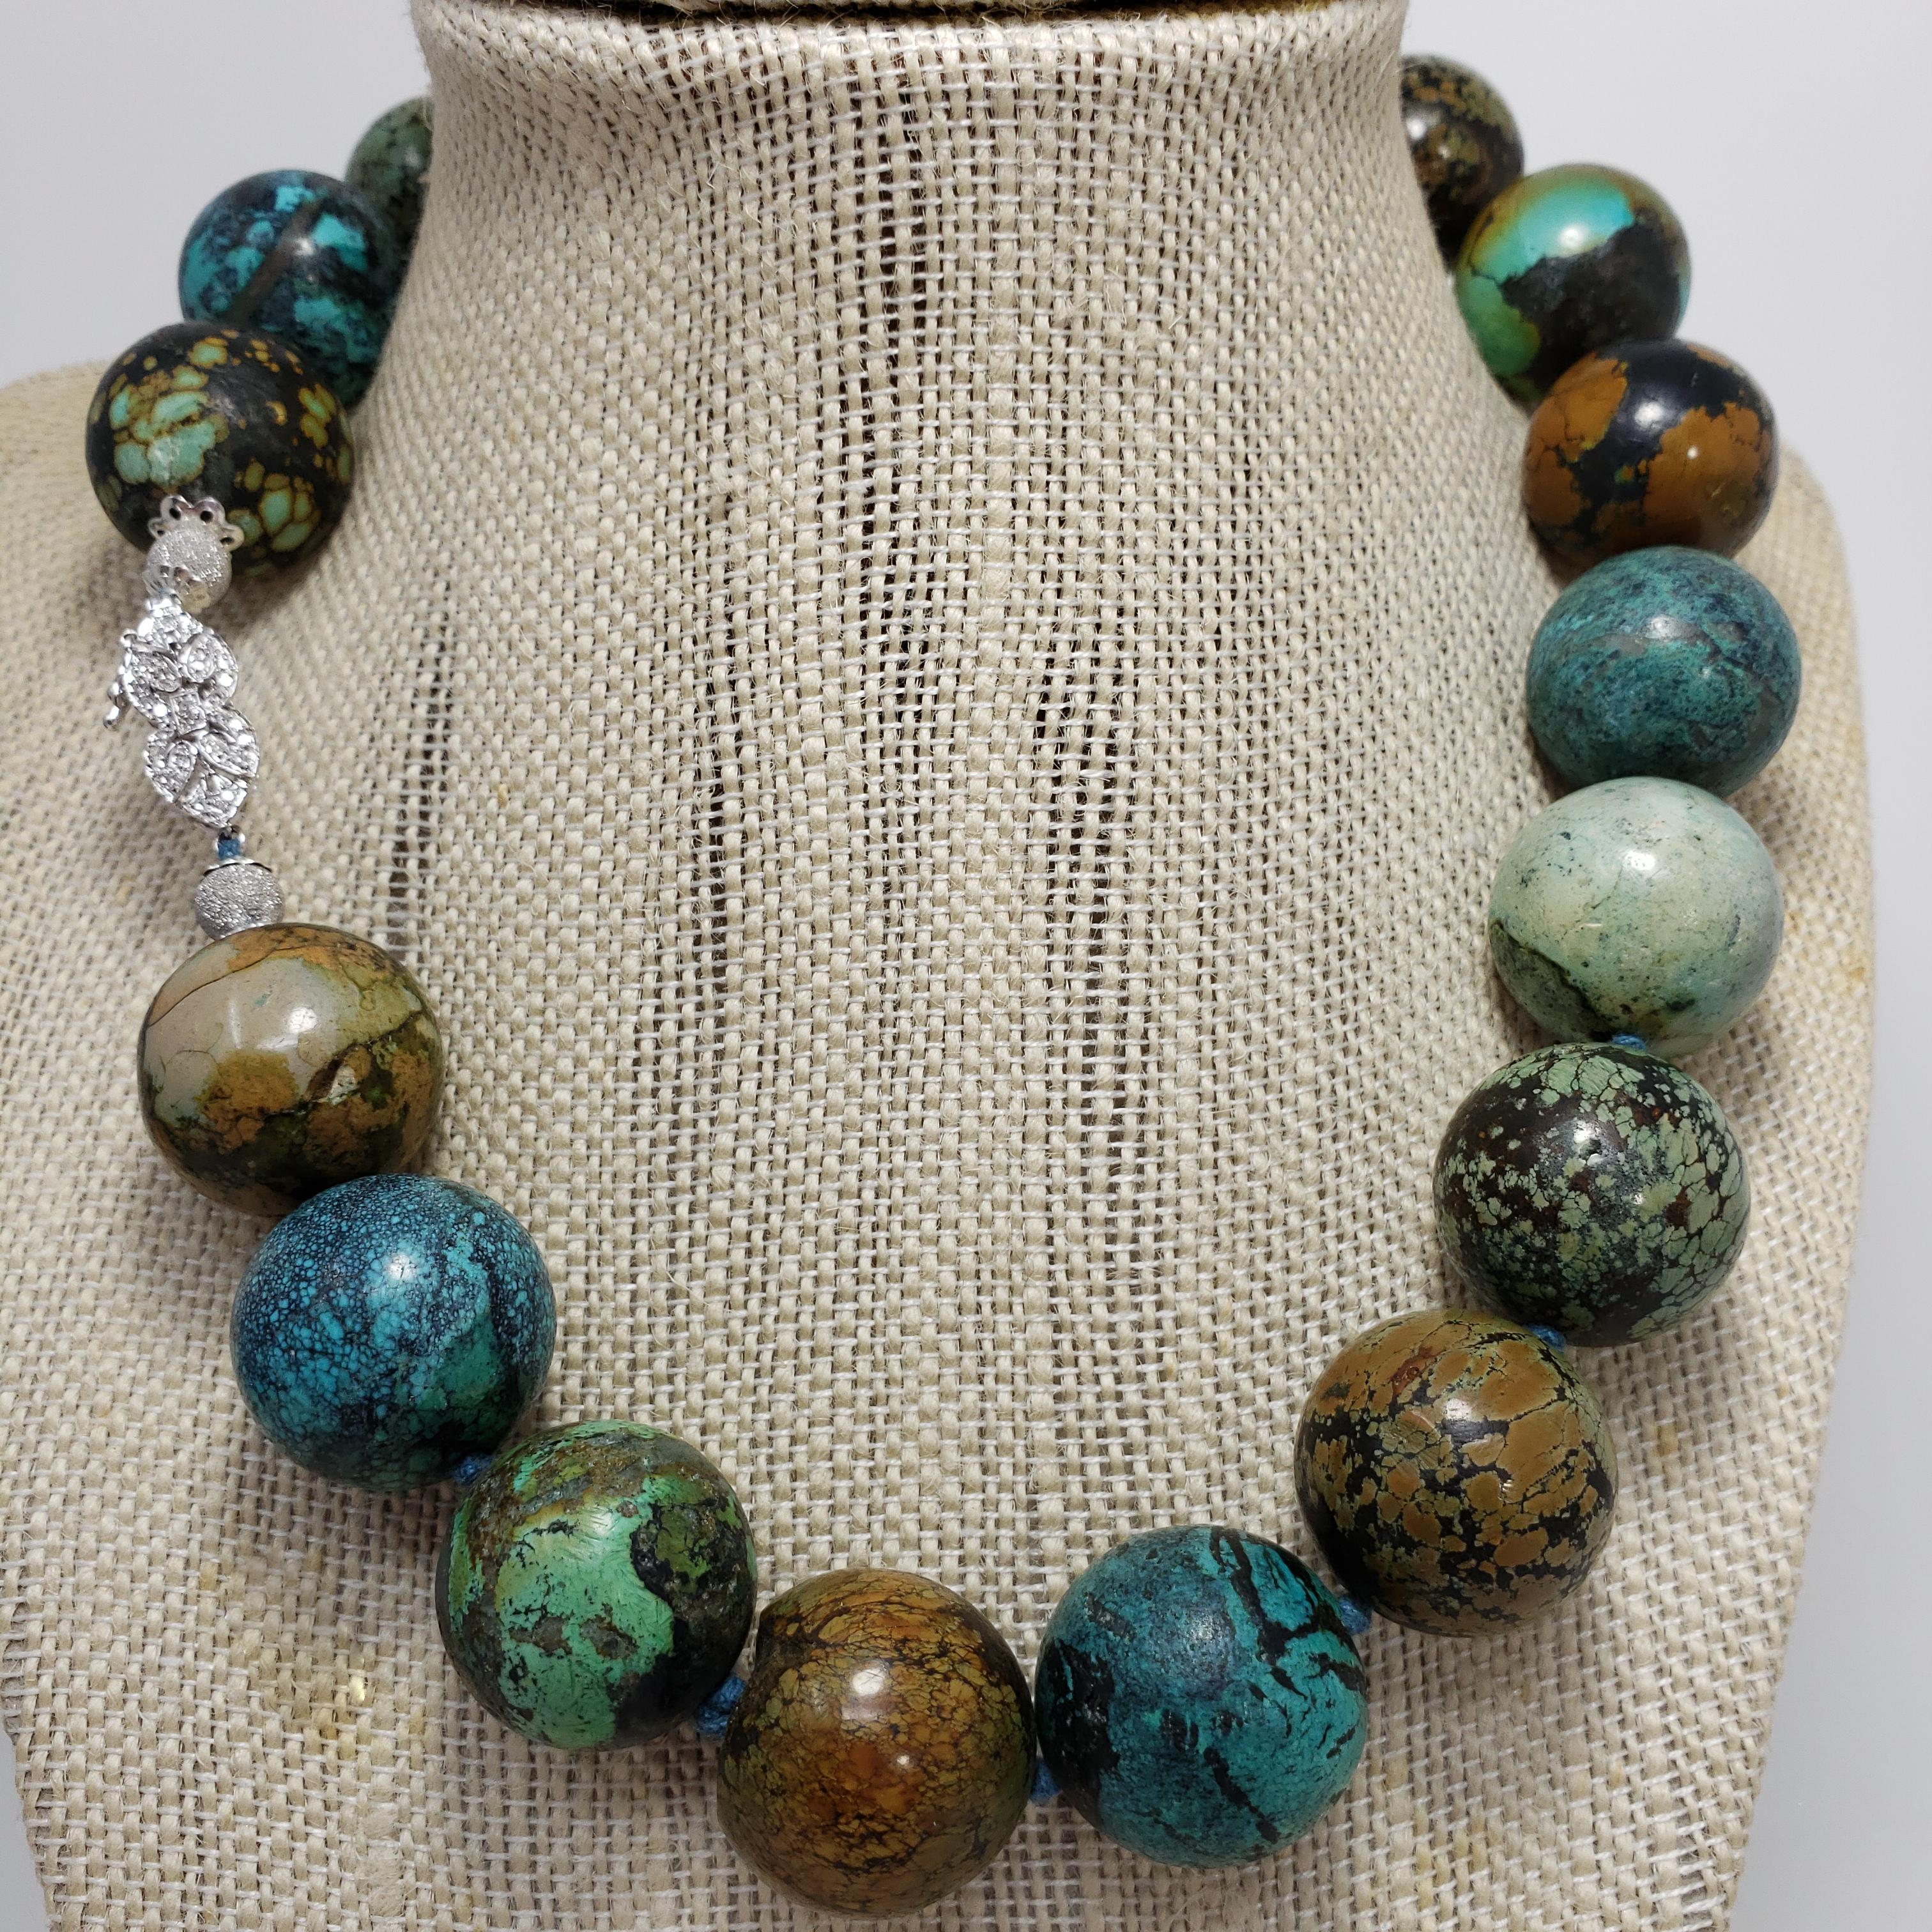 An exquisite hubei turquoise bead necklace featuring a single strand of 20mm turquoise beads in gorgeous teal, green, and earth tones. Fastened with a 14K white gold diamond-encrusted clasp, and accented with two diamond dust white gold beads. A